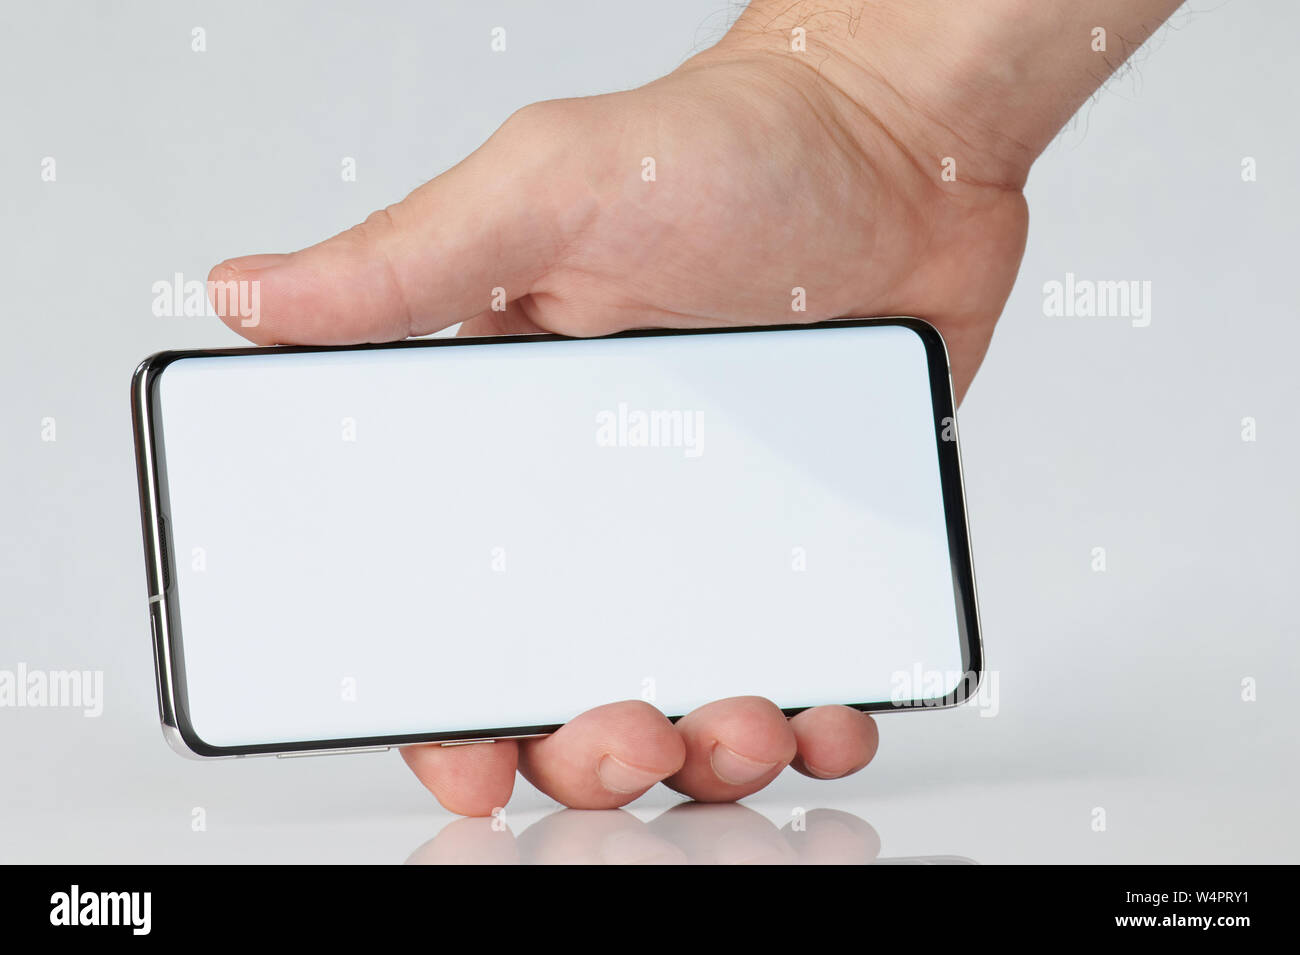 Close up of smartphone in hand on horizontal position isolated Stock Photo